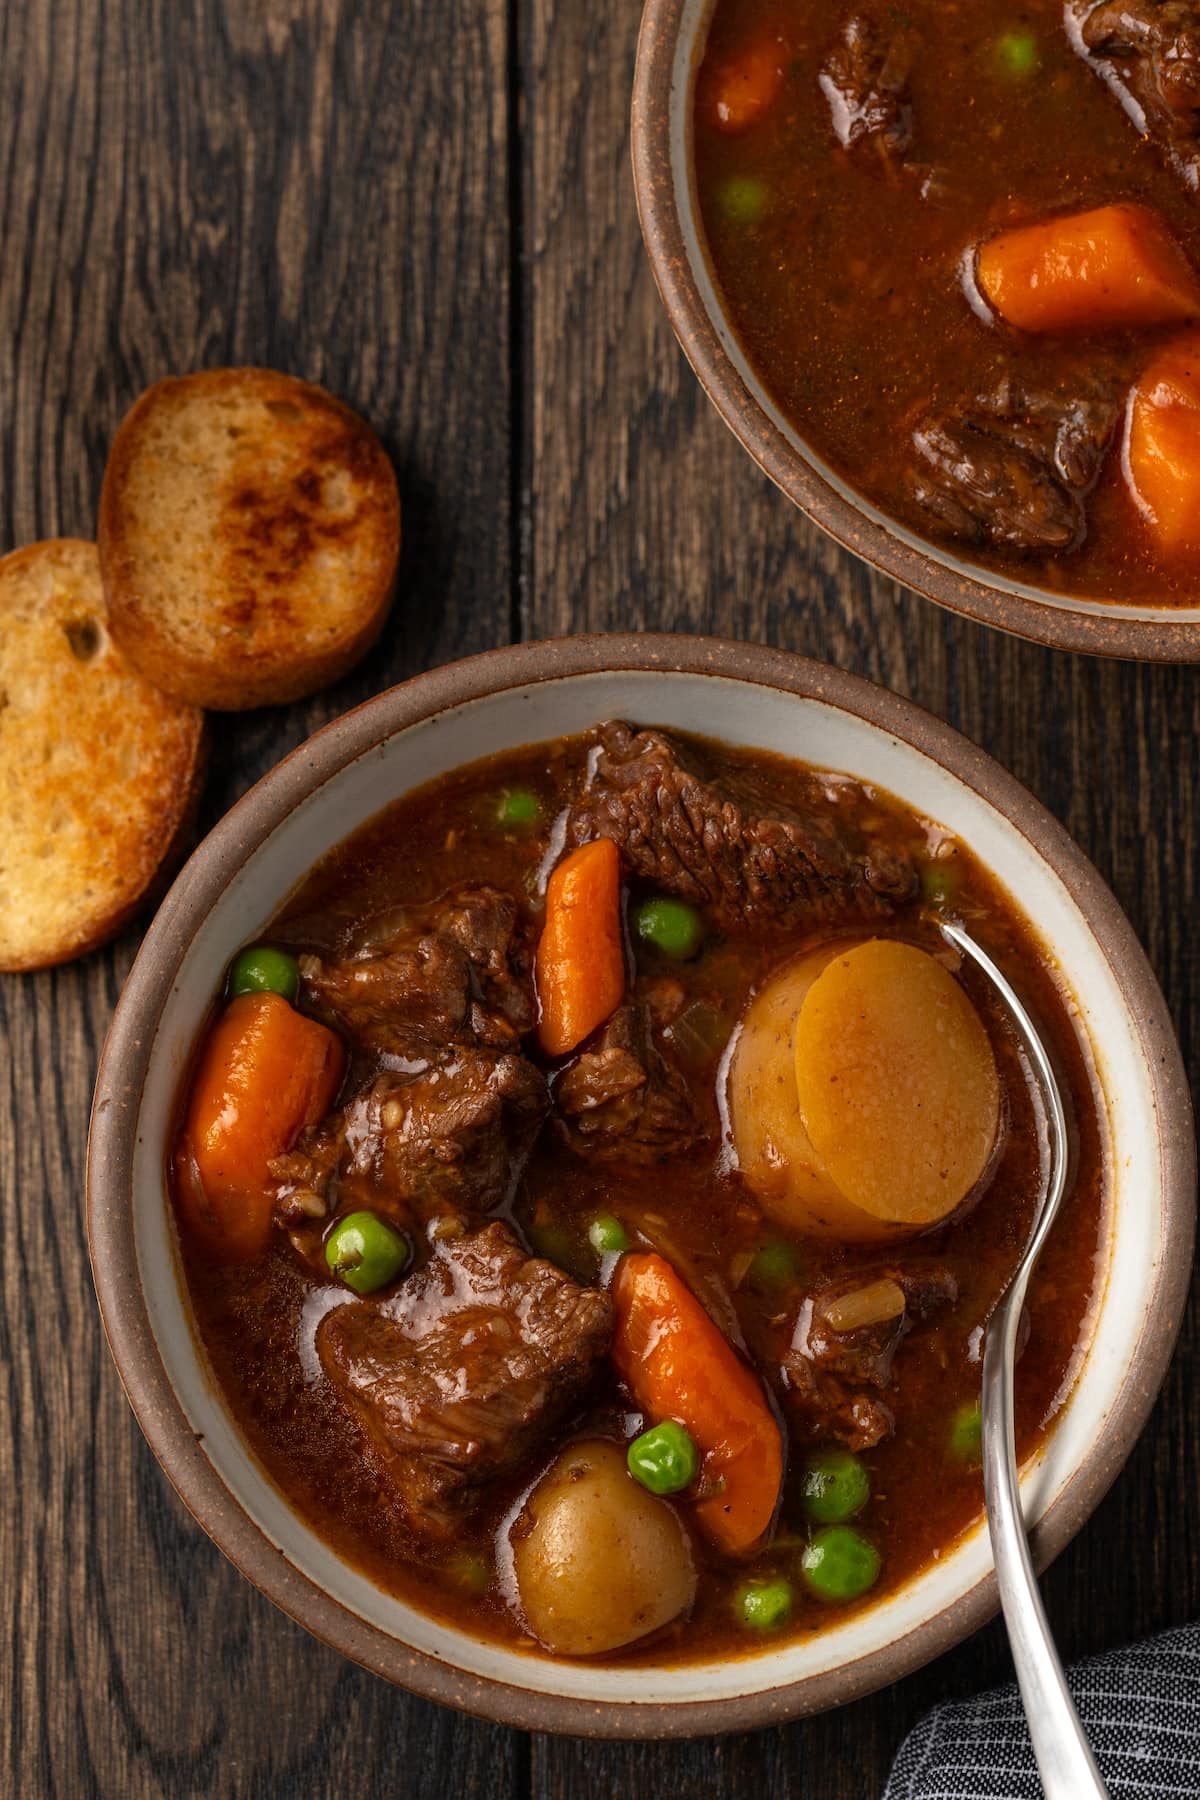 Overhead view of a bowl of Instant Pot beef stew on a wooden table, next to a second bowl and crostini.